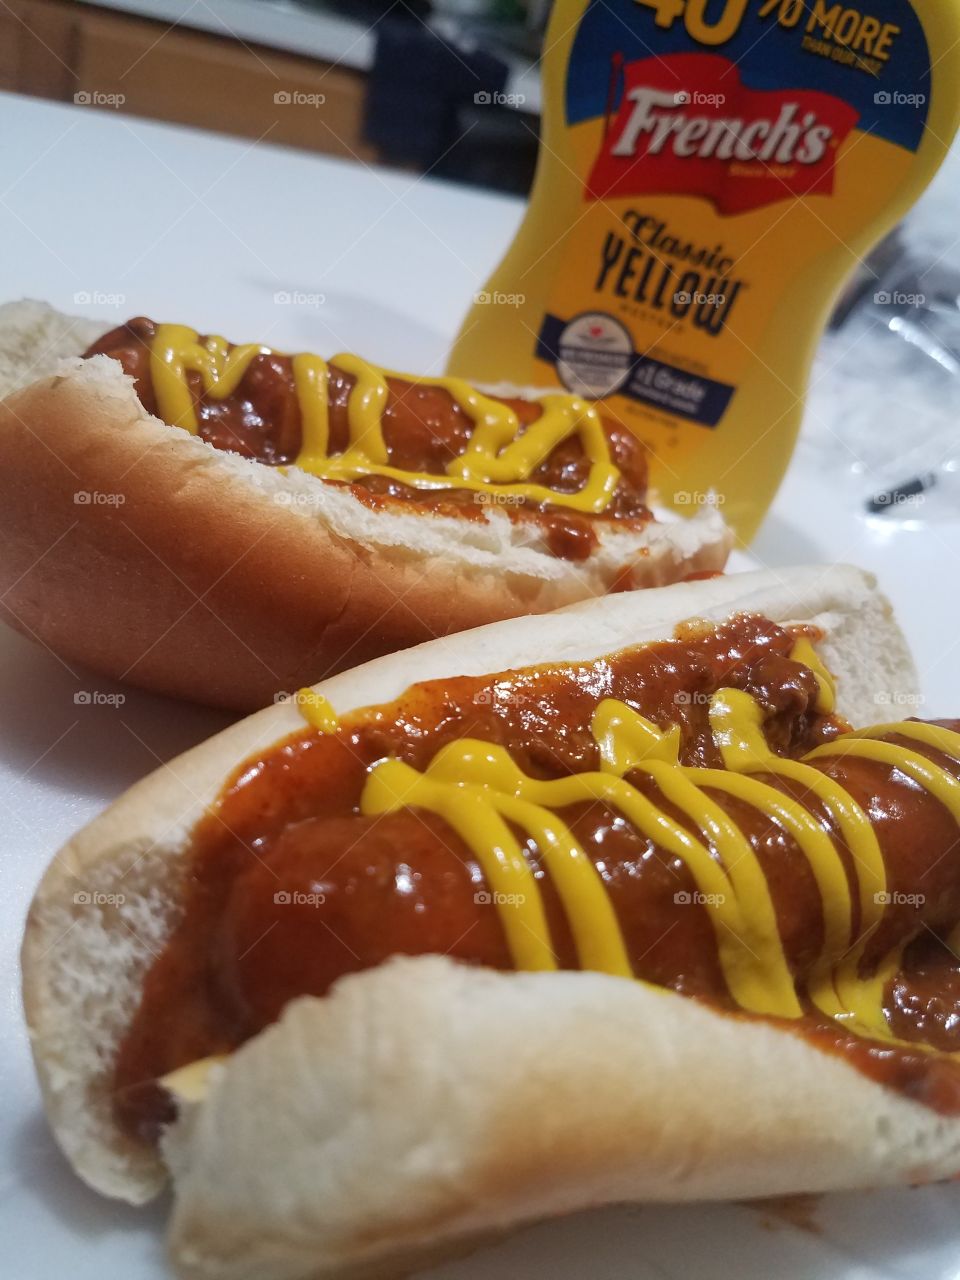 Chili dogs for dinner tonight! They wouldnt be complete without French's mustard though